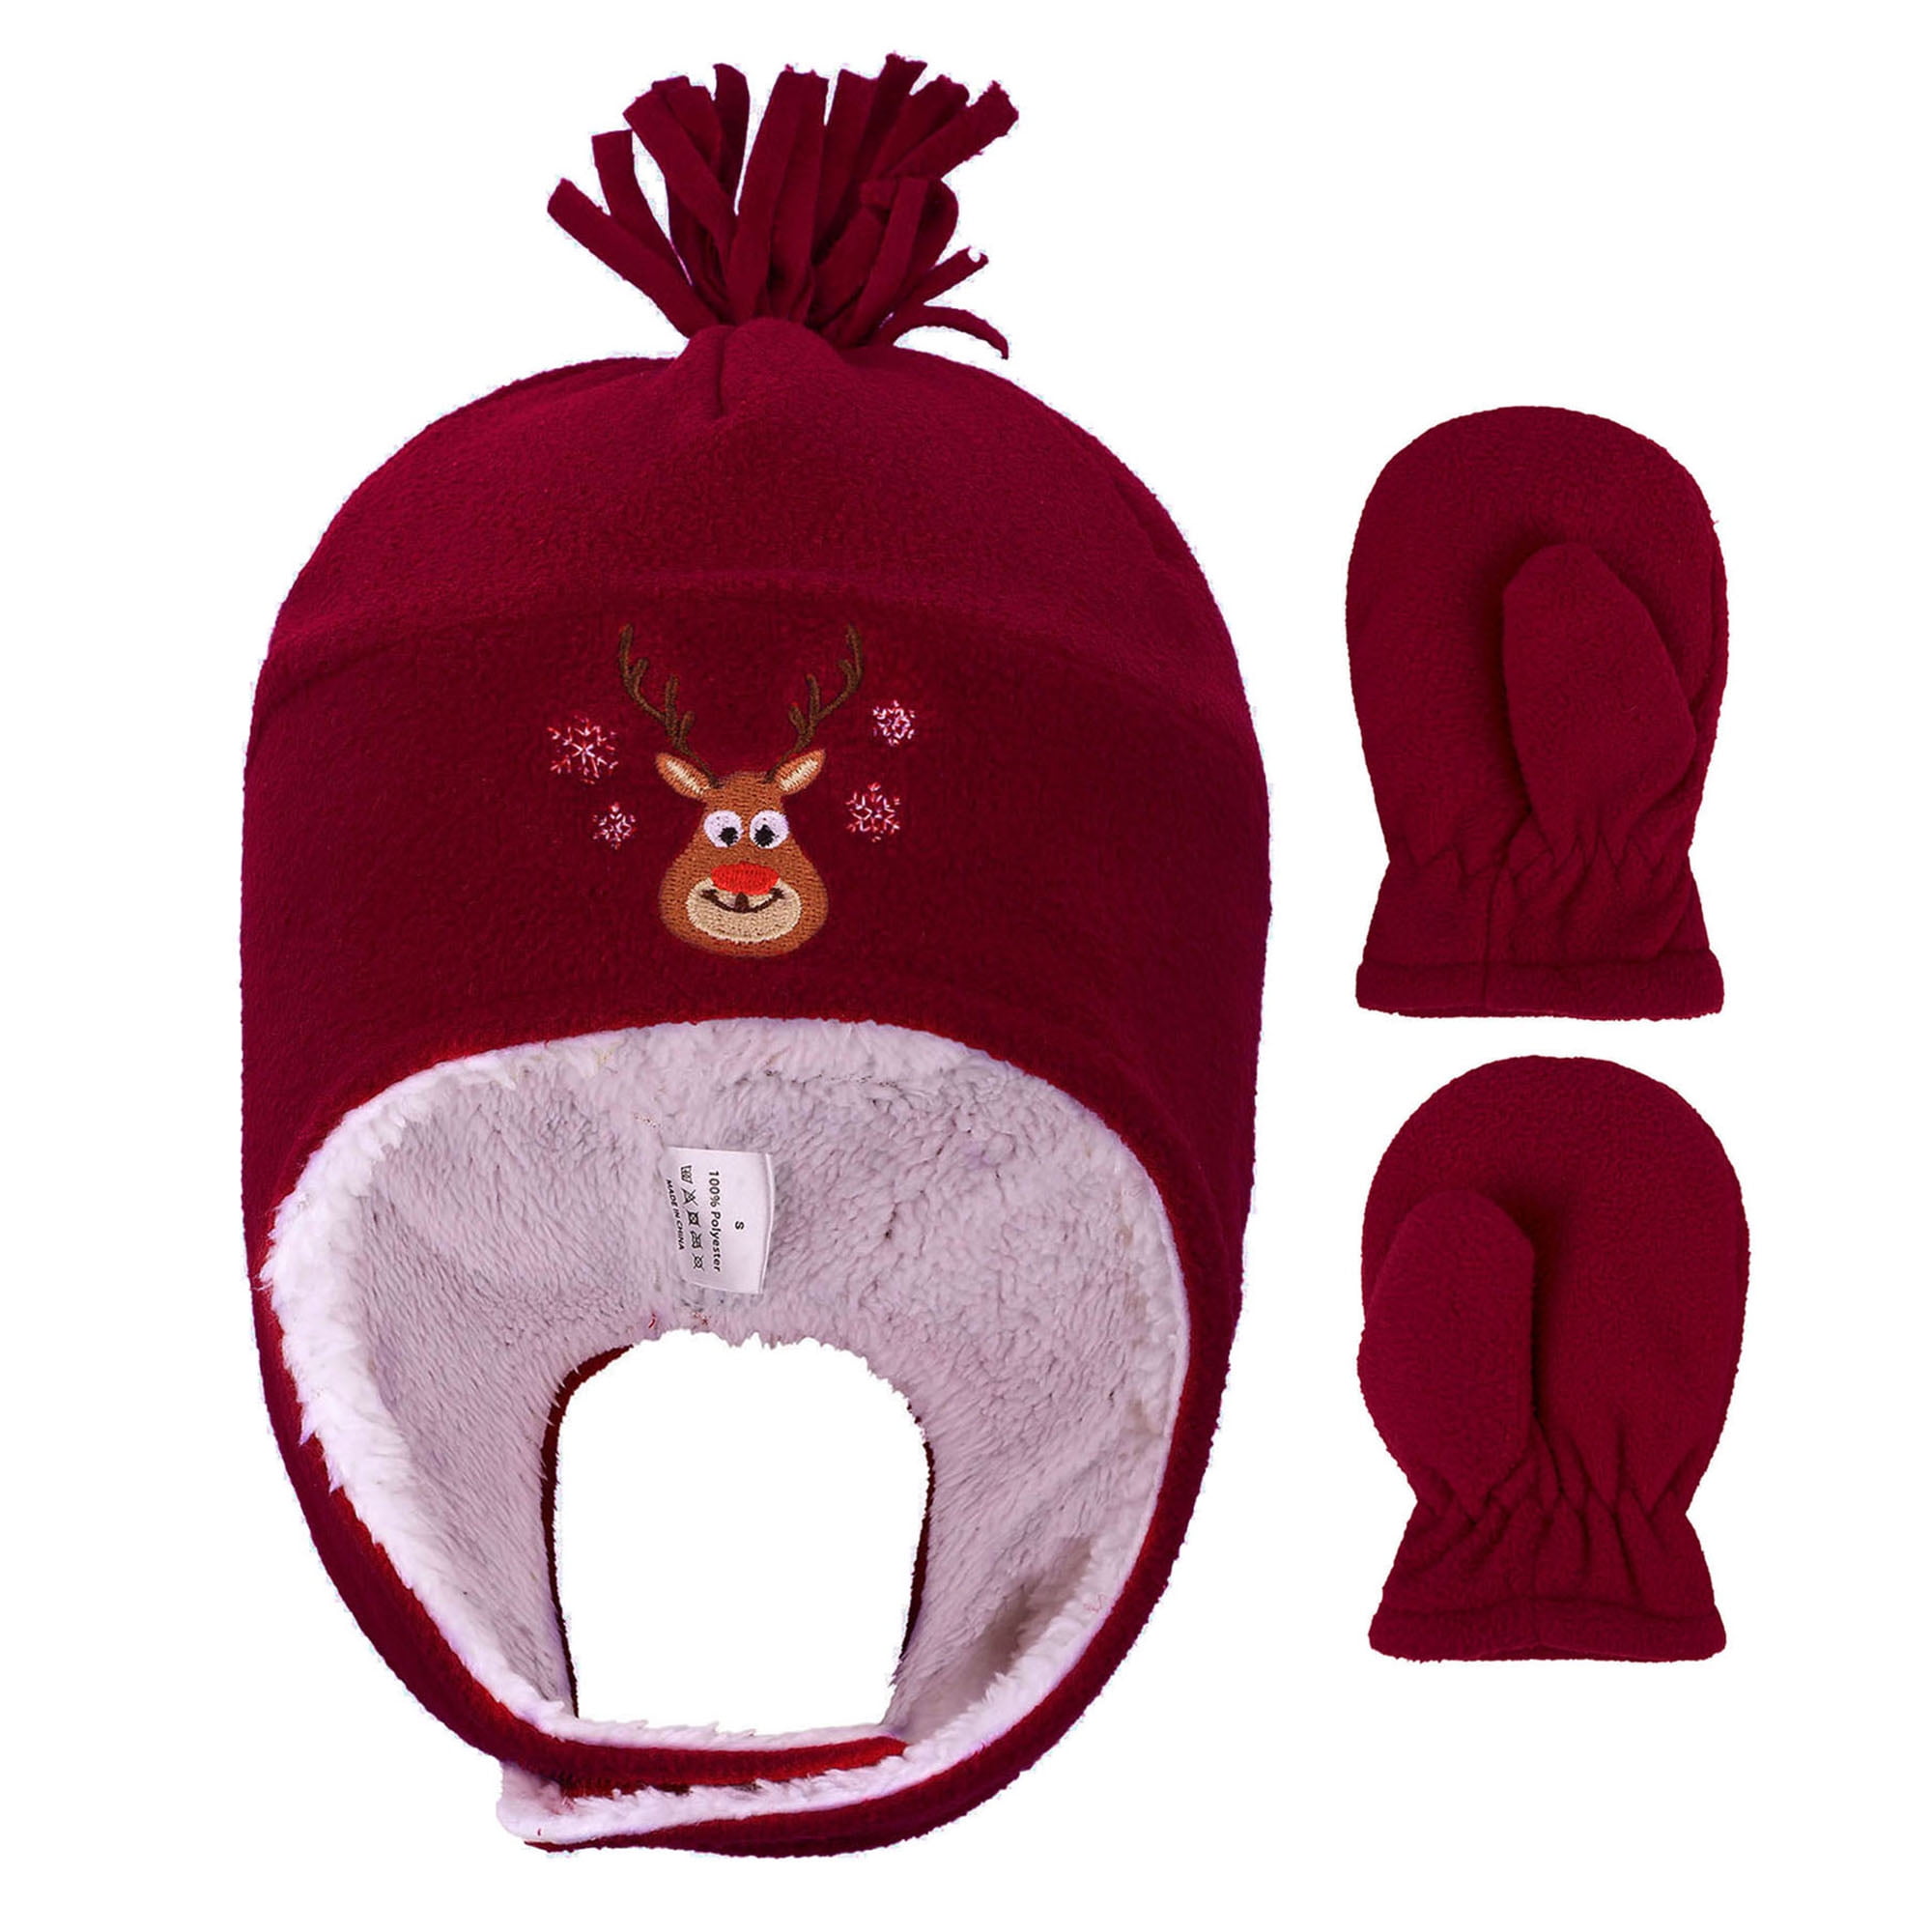 Embroidered Childs fleece stocking hat